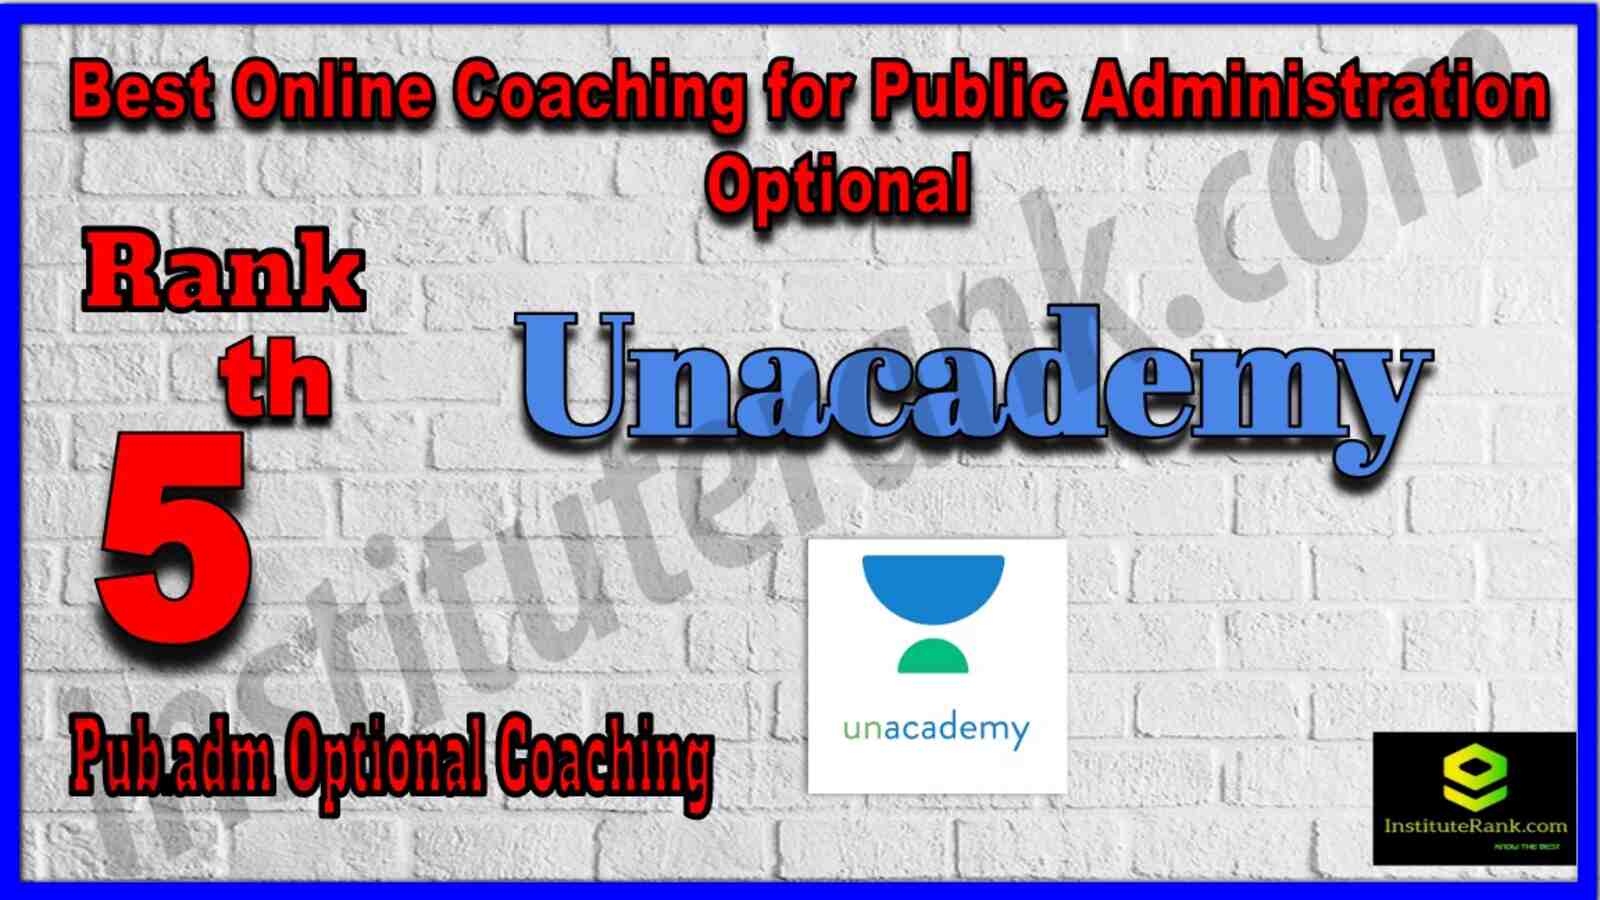 Rank 5 Best Online Coaching for Public Administration Optional